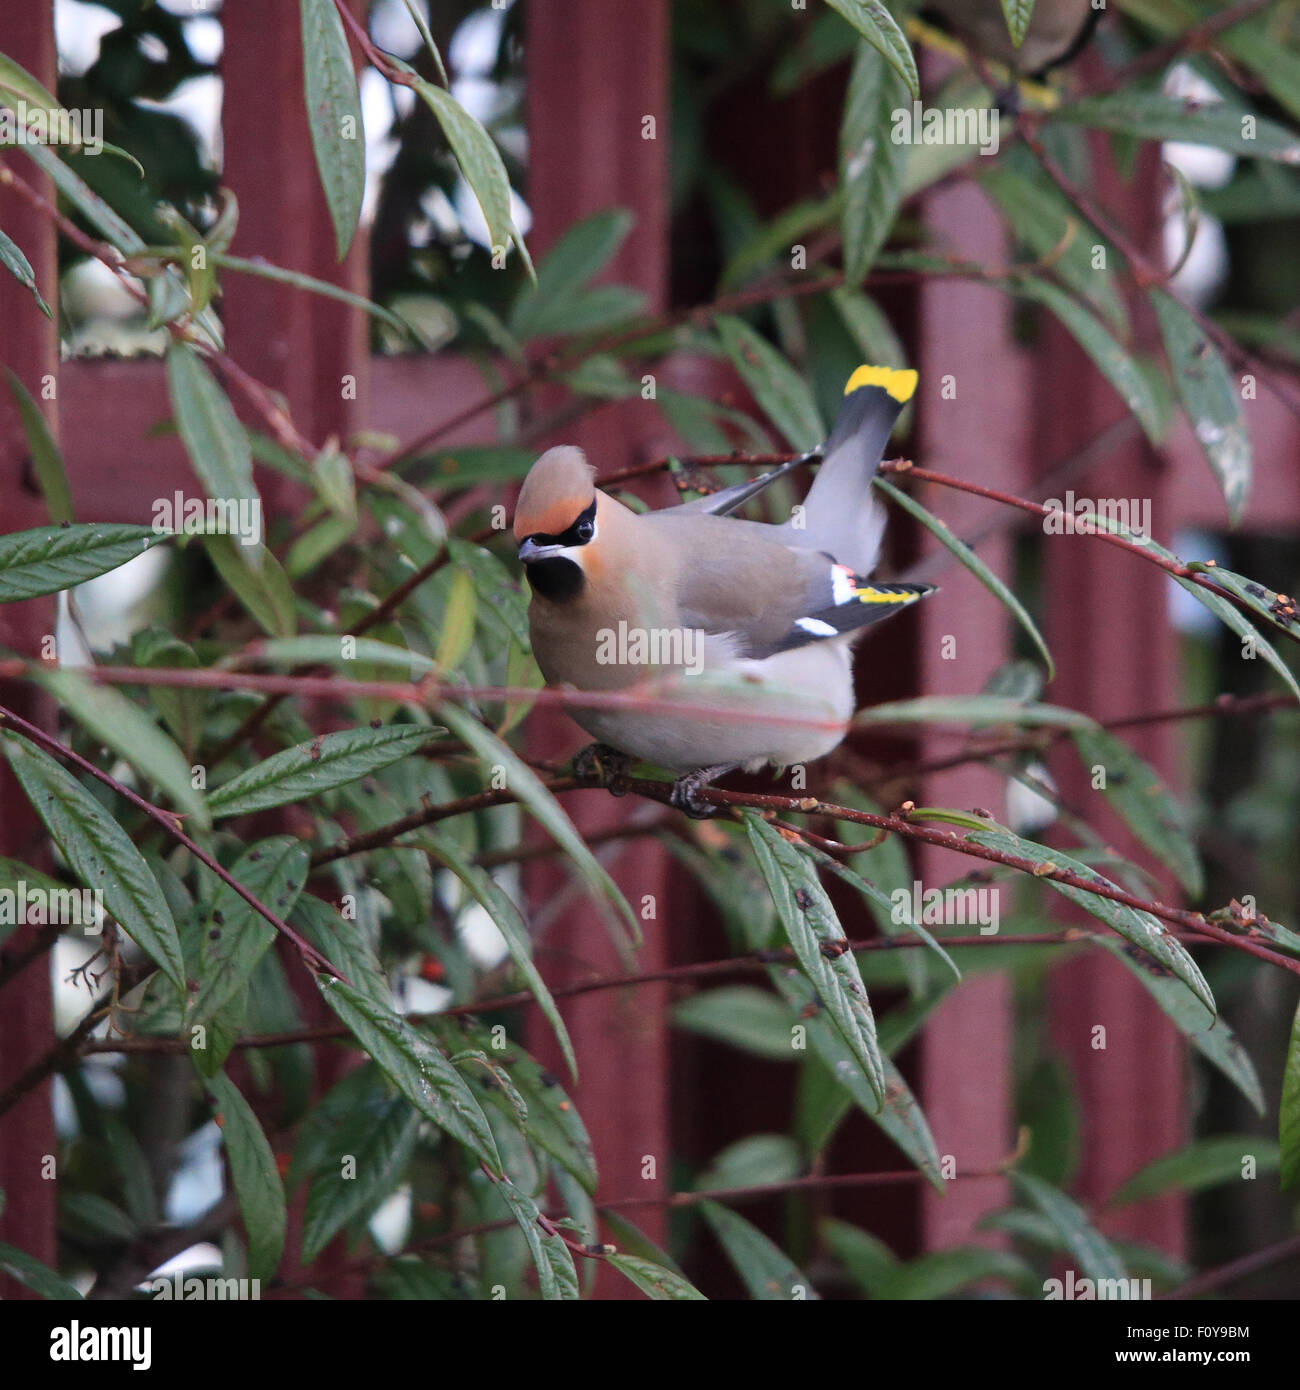 A lovely Bohemian Waxwing, also known simply as Waxwing, perched on a branch in front of a red fence Stock Photo